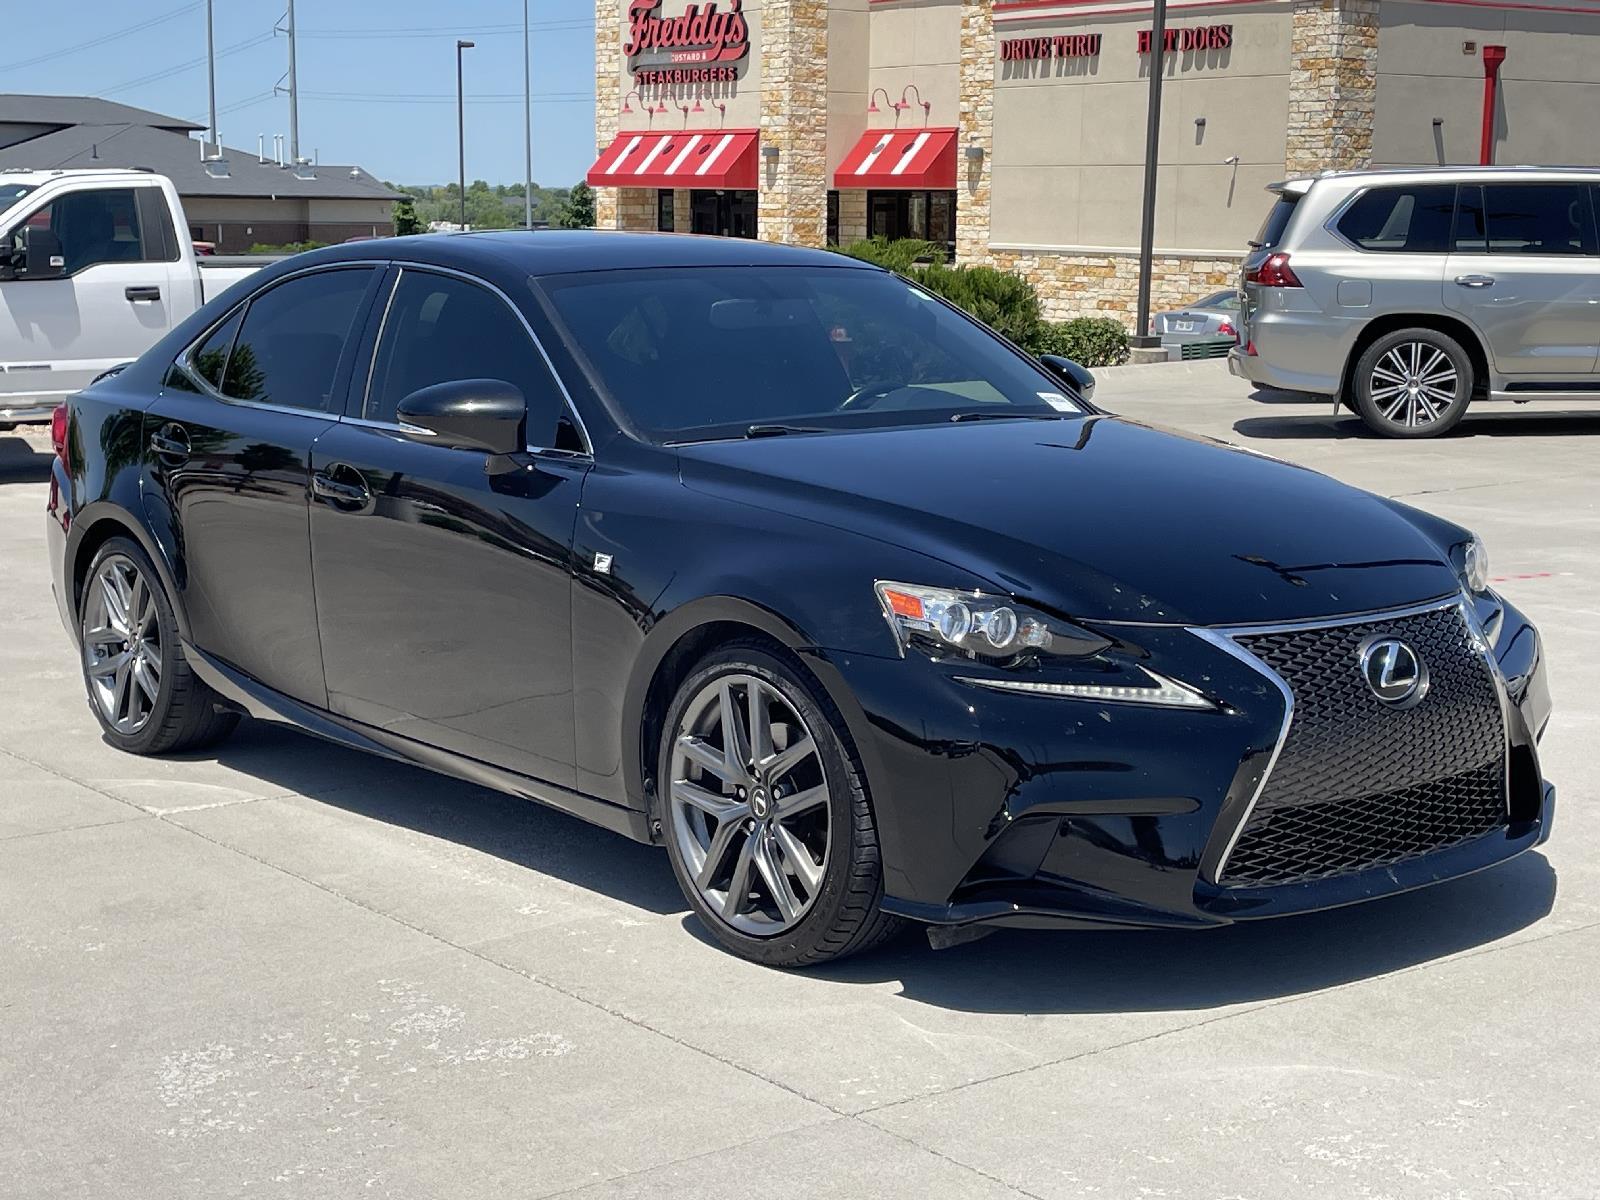 Used 2015 Lexus IS 250 Crafted Line Sedan for sale in Lincoln NE